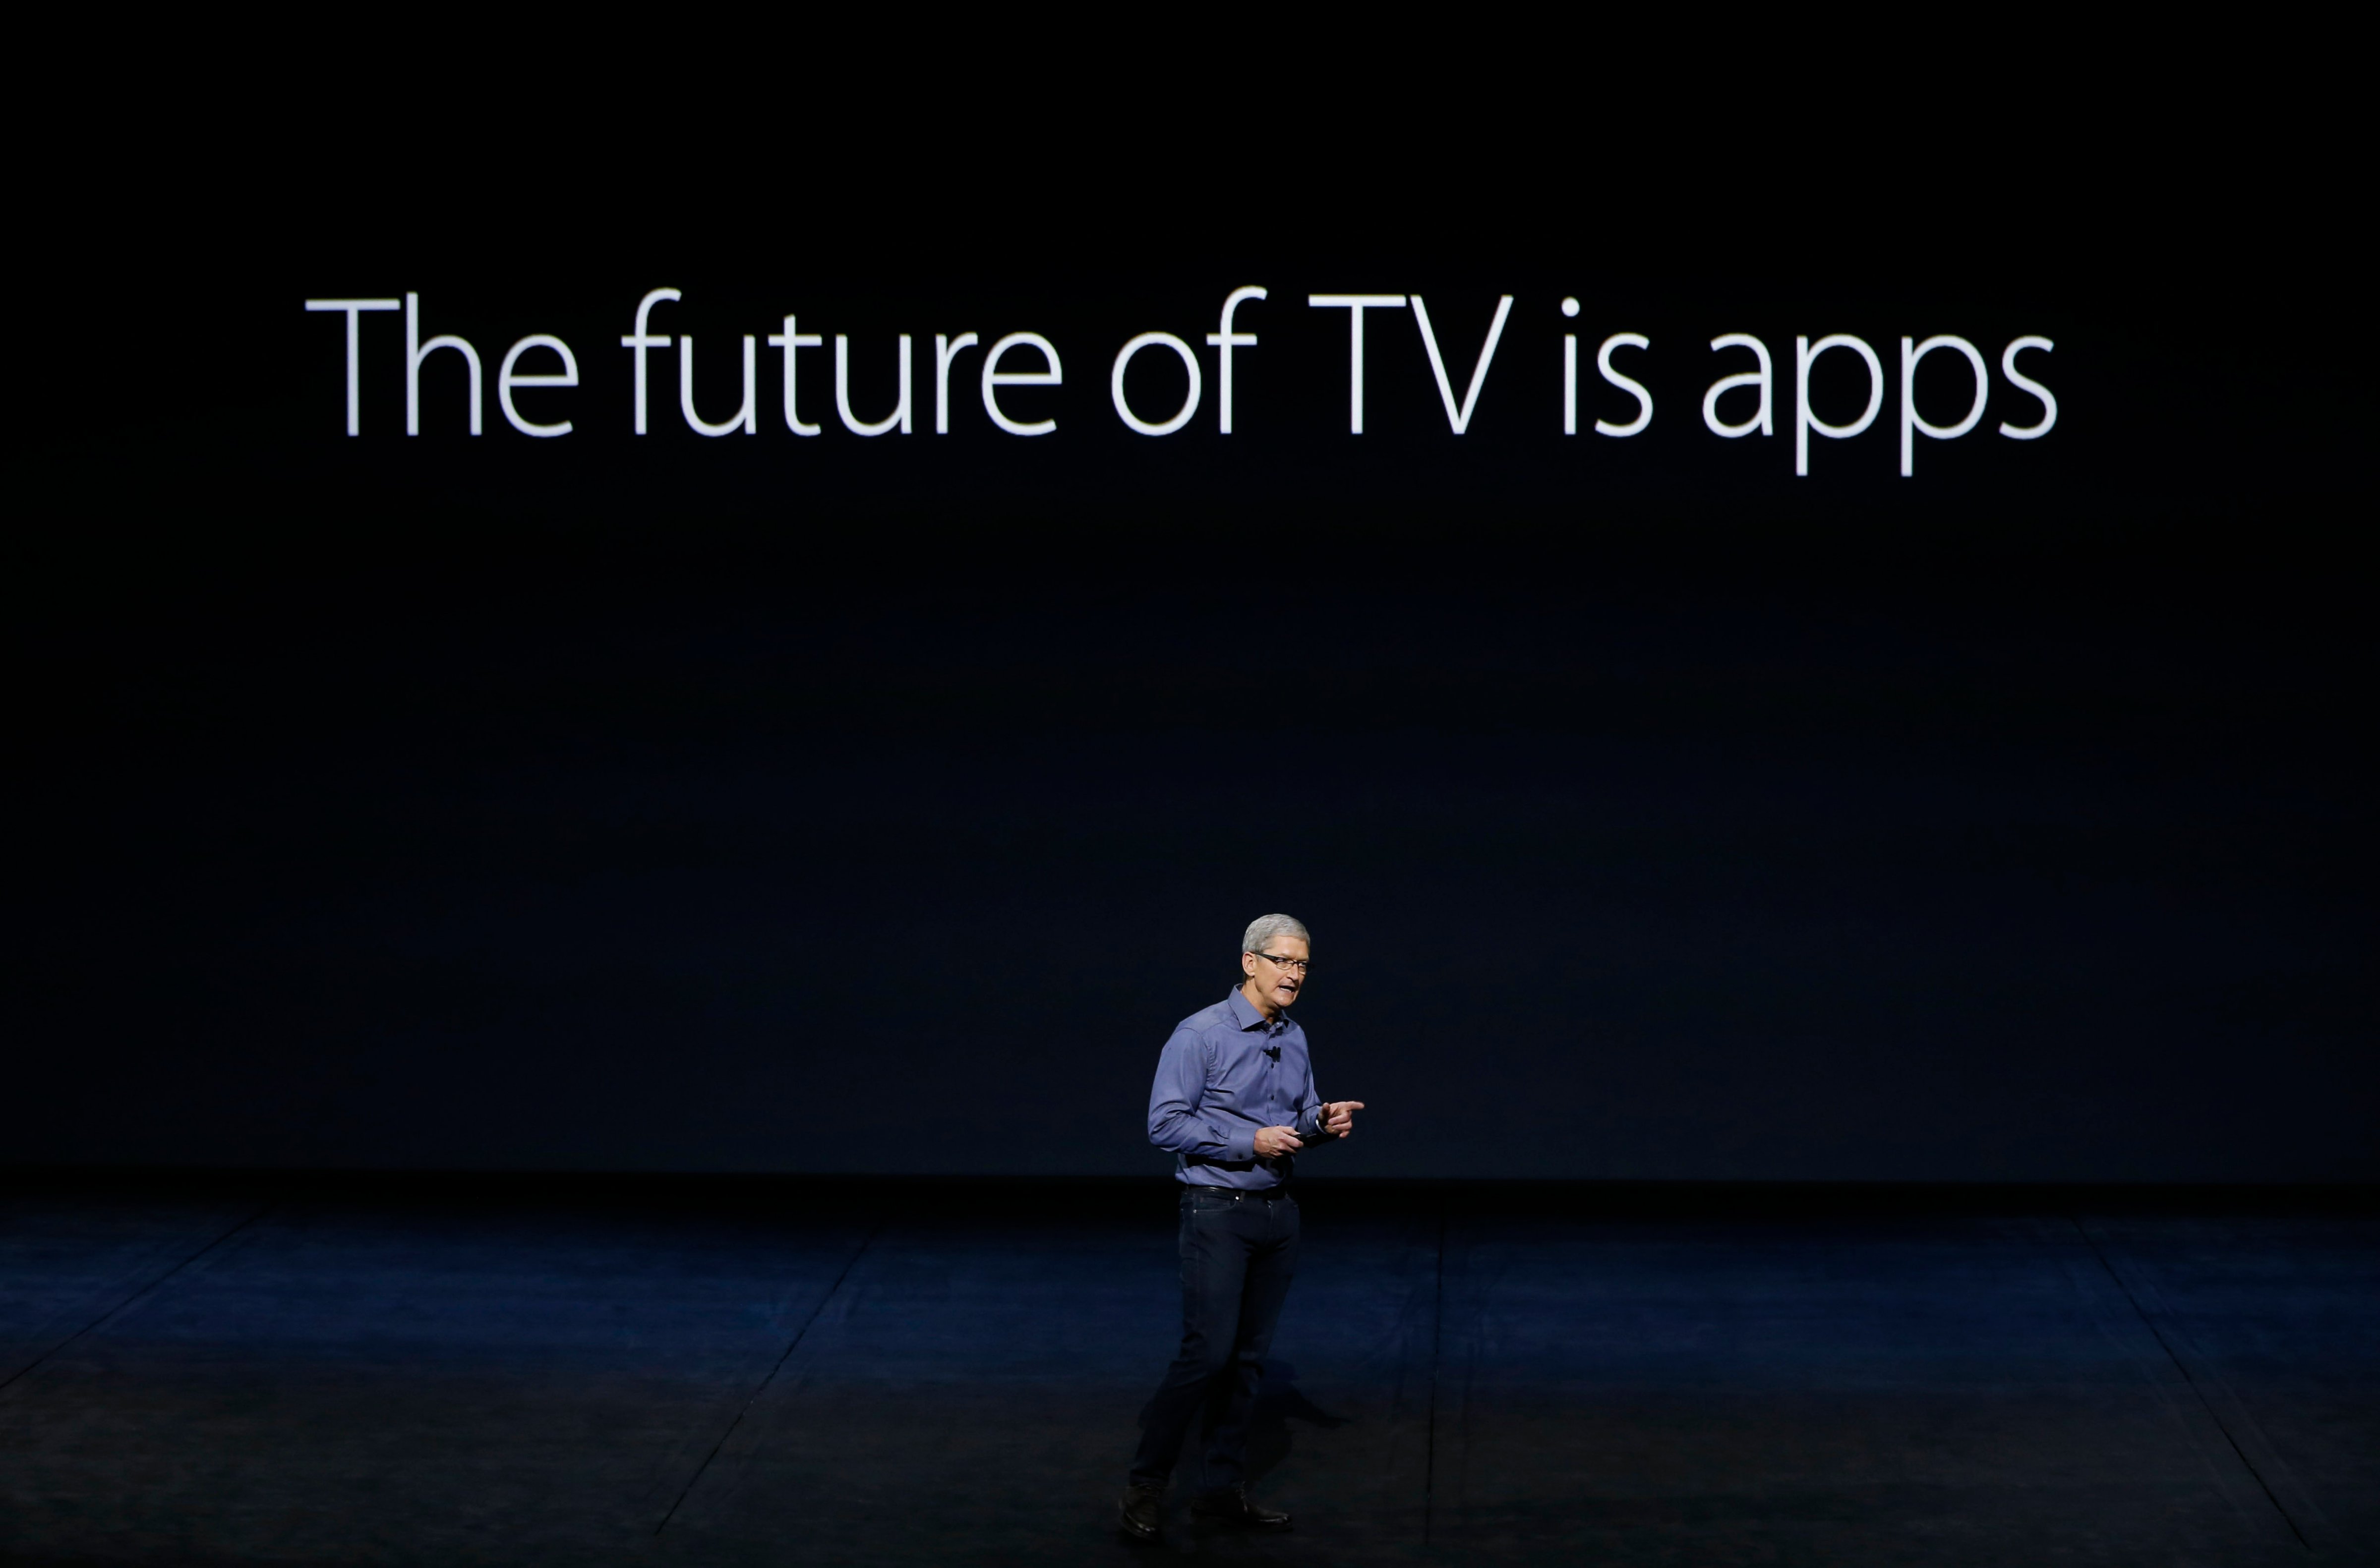 Apple CEO Tim Cook introduces the New Apple TV during a Special Event at Bill Graham Civic Auditorium September 9, 2015 in San Francisco, California. (Stephen Lam&mdash;Getty Images)